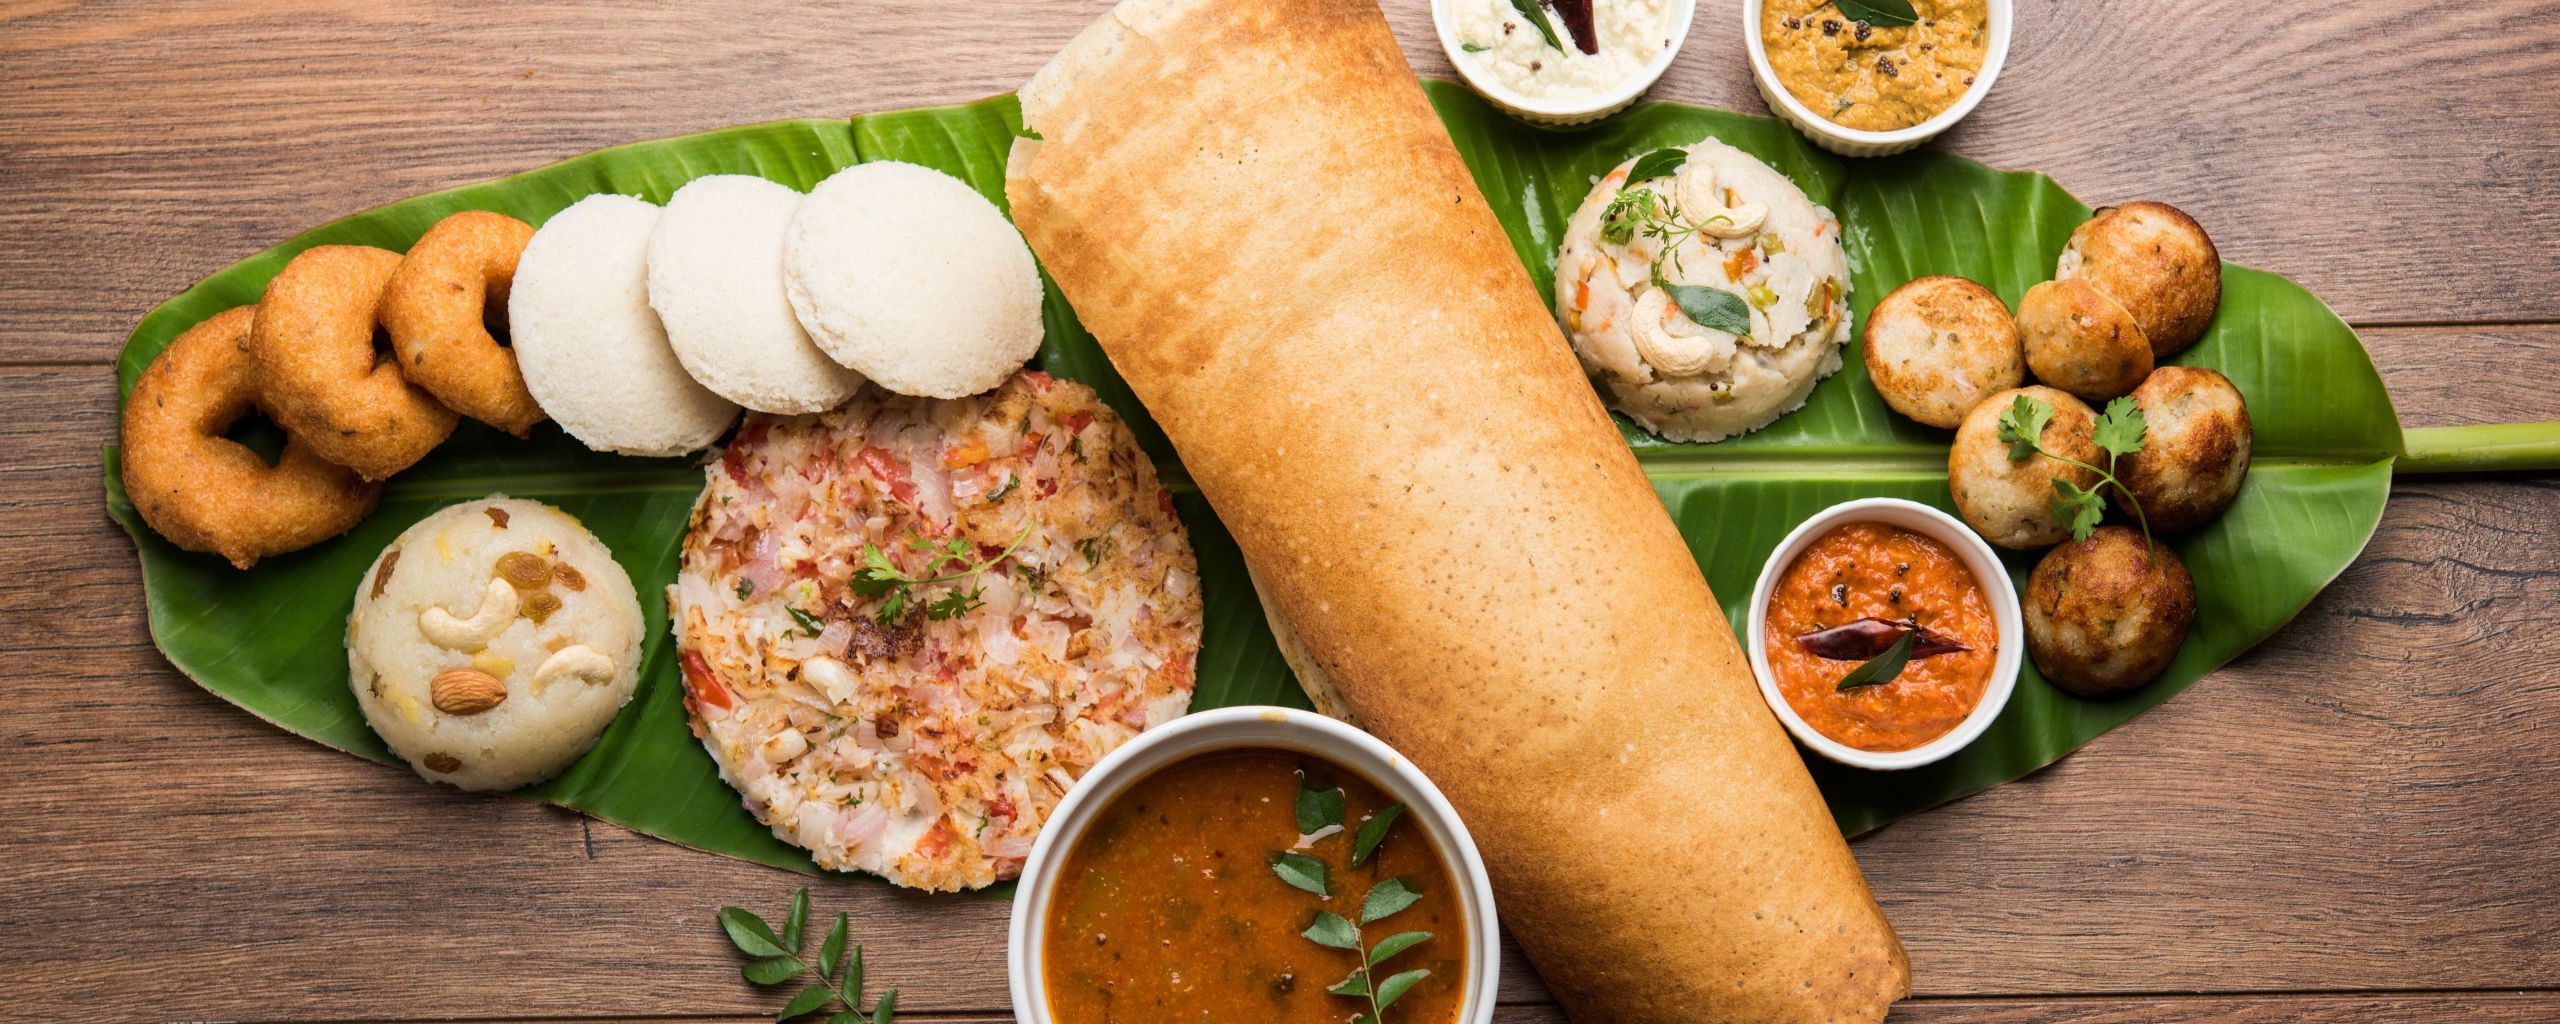 South Indian Recipes
 Delicious South Indian Food In The City